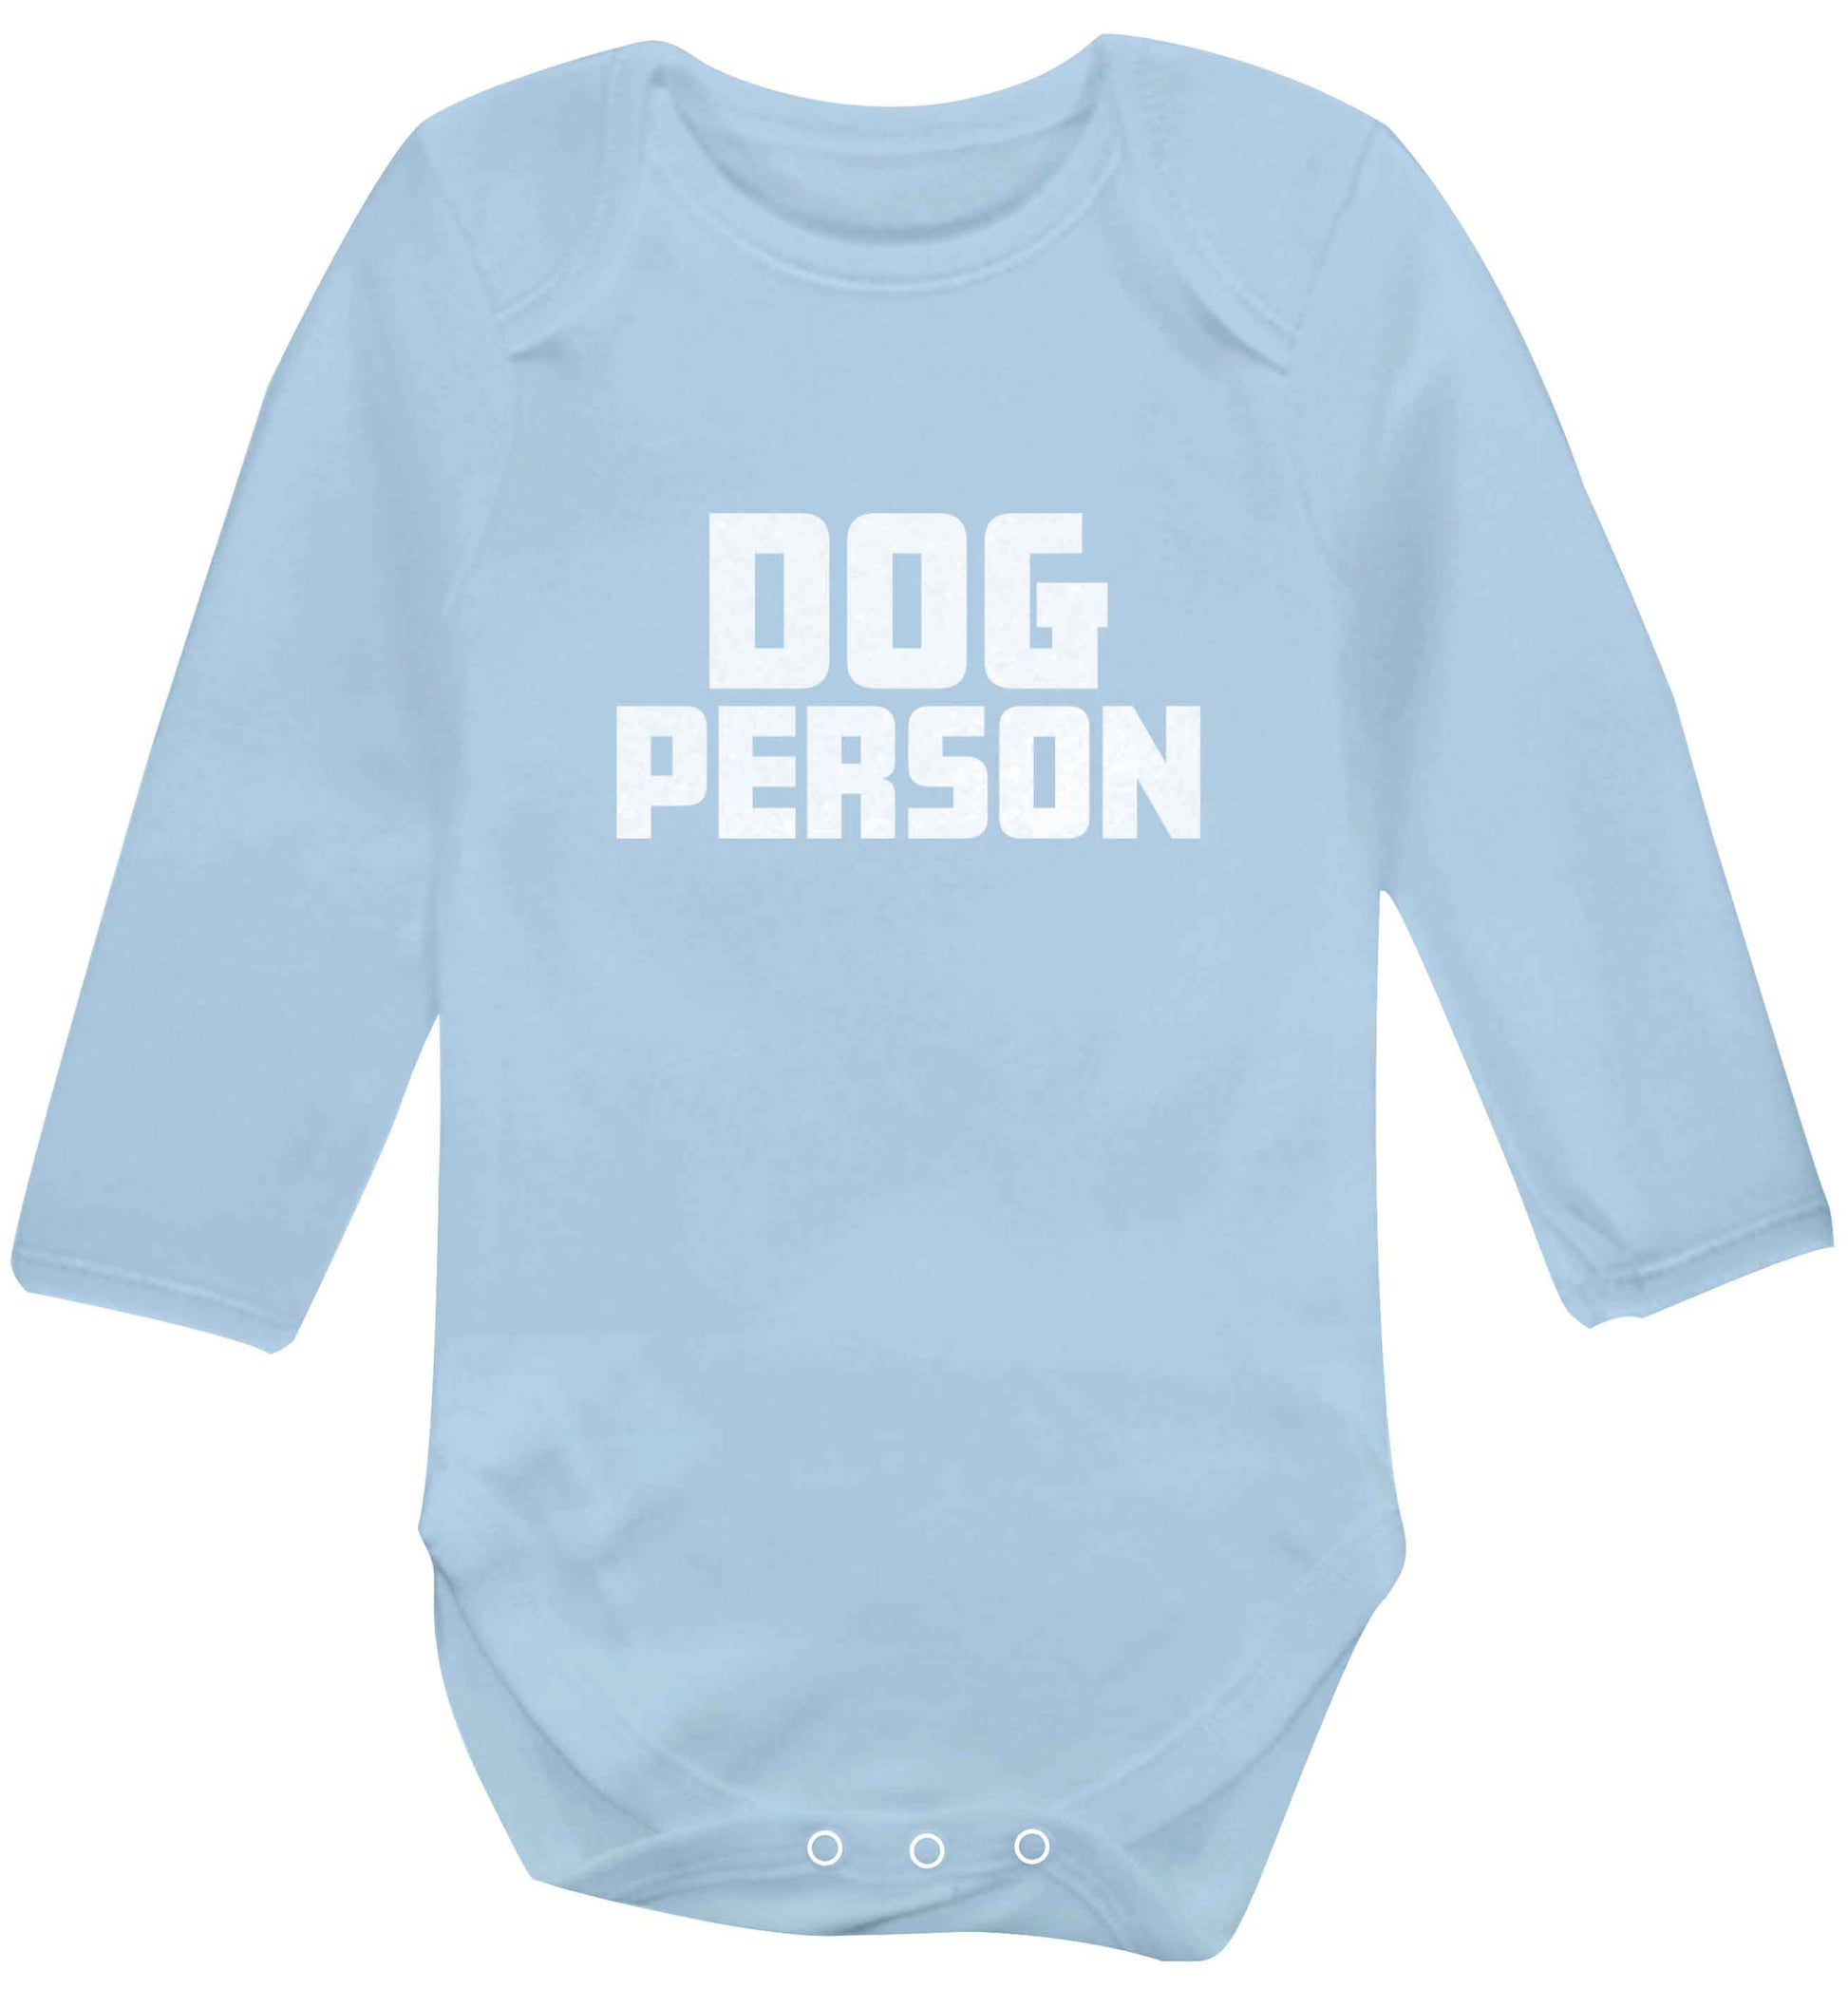 Dog Person Kit baby vest long sleeved pale blue 6-12 months